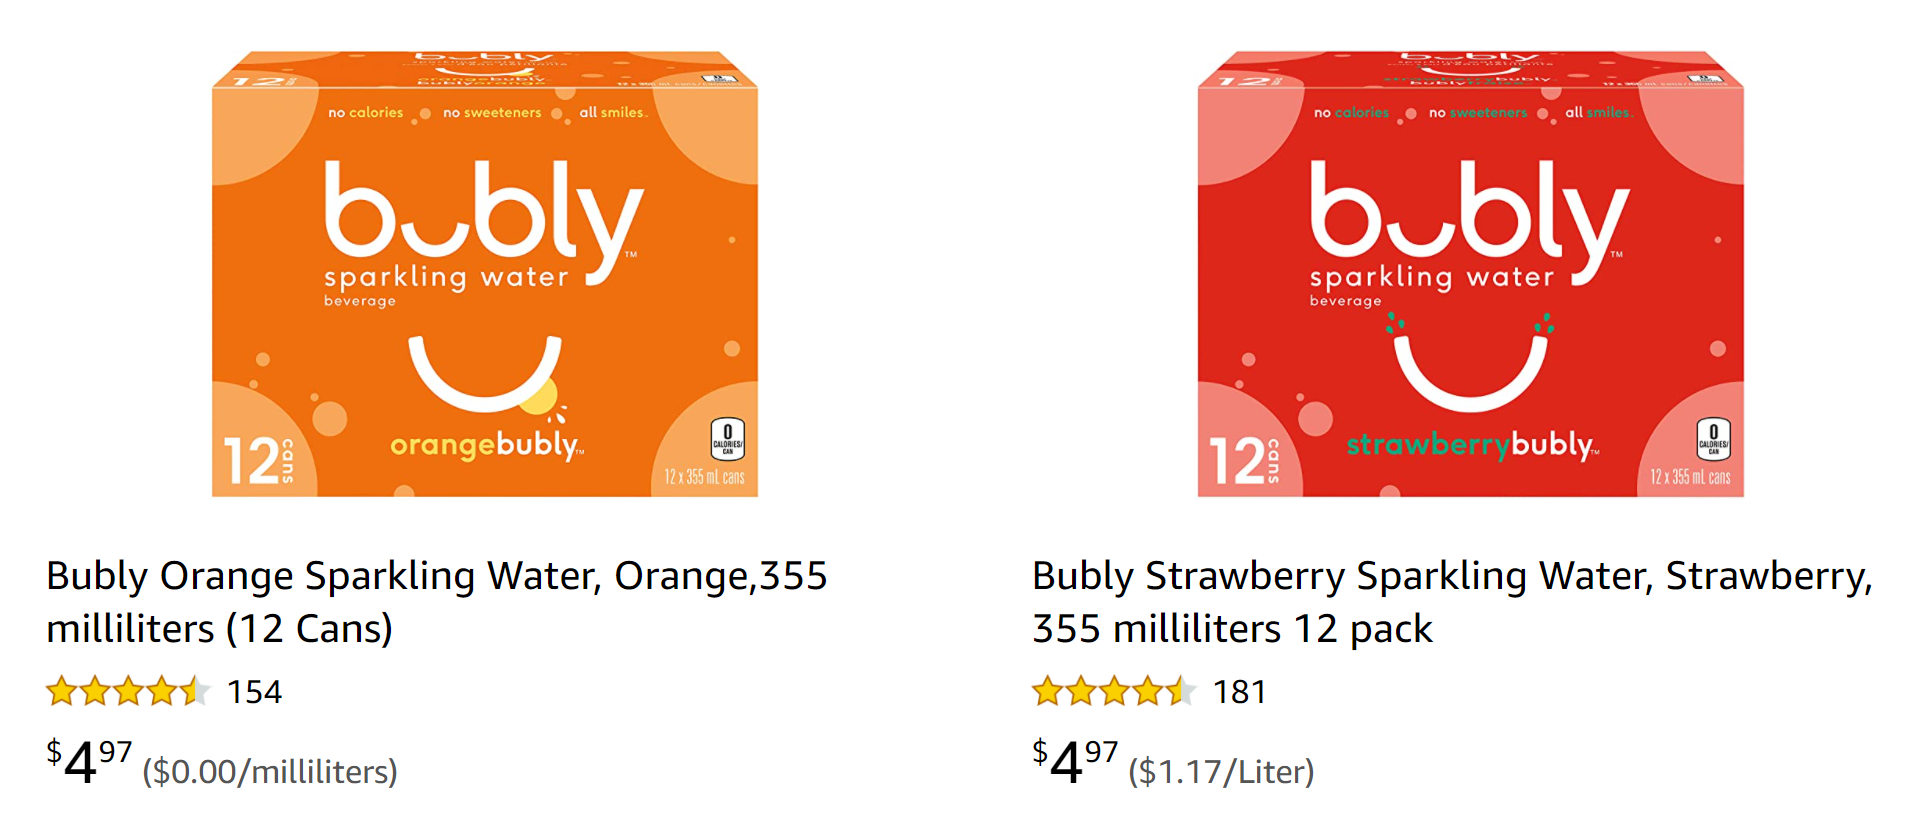 bubly-bubble-water-0-calories-0-fat-12-cans-497-2020-12-4